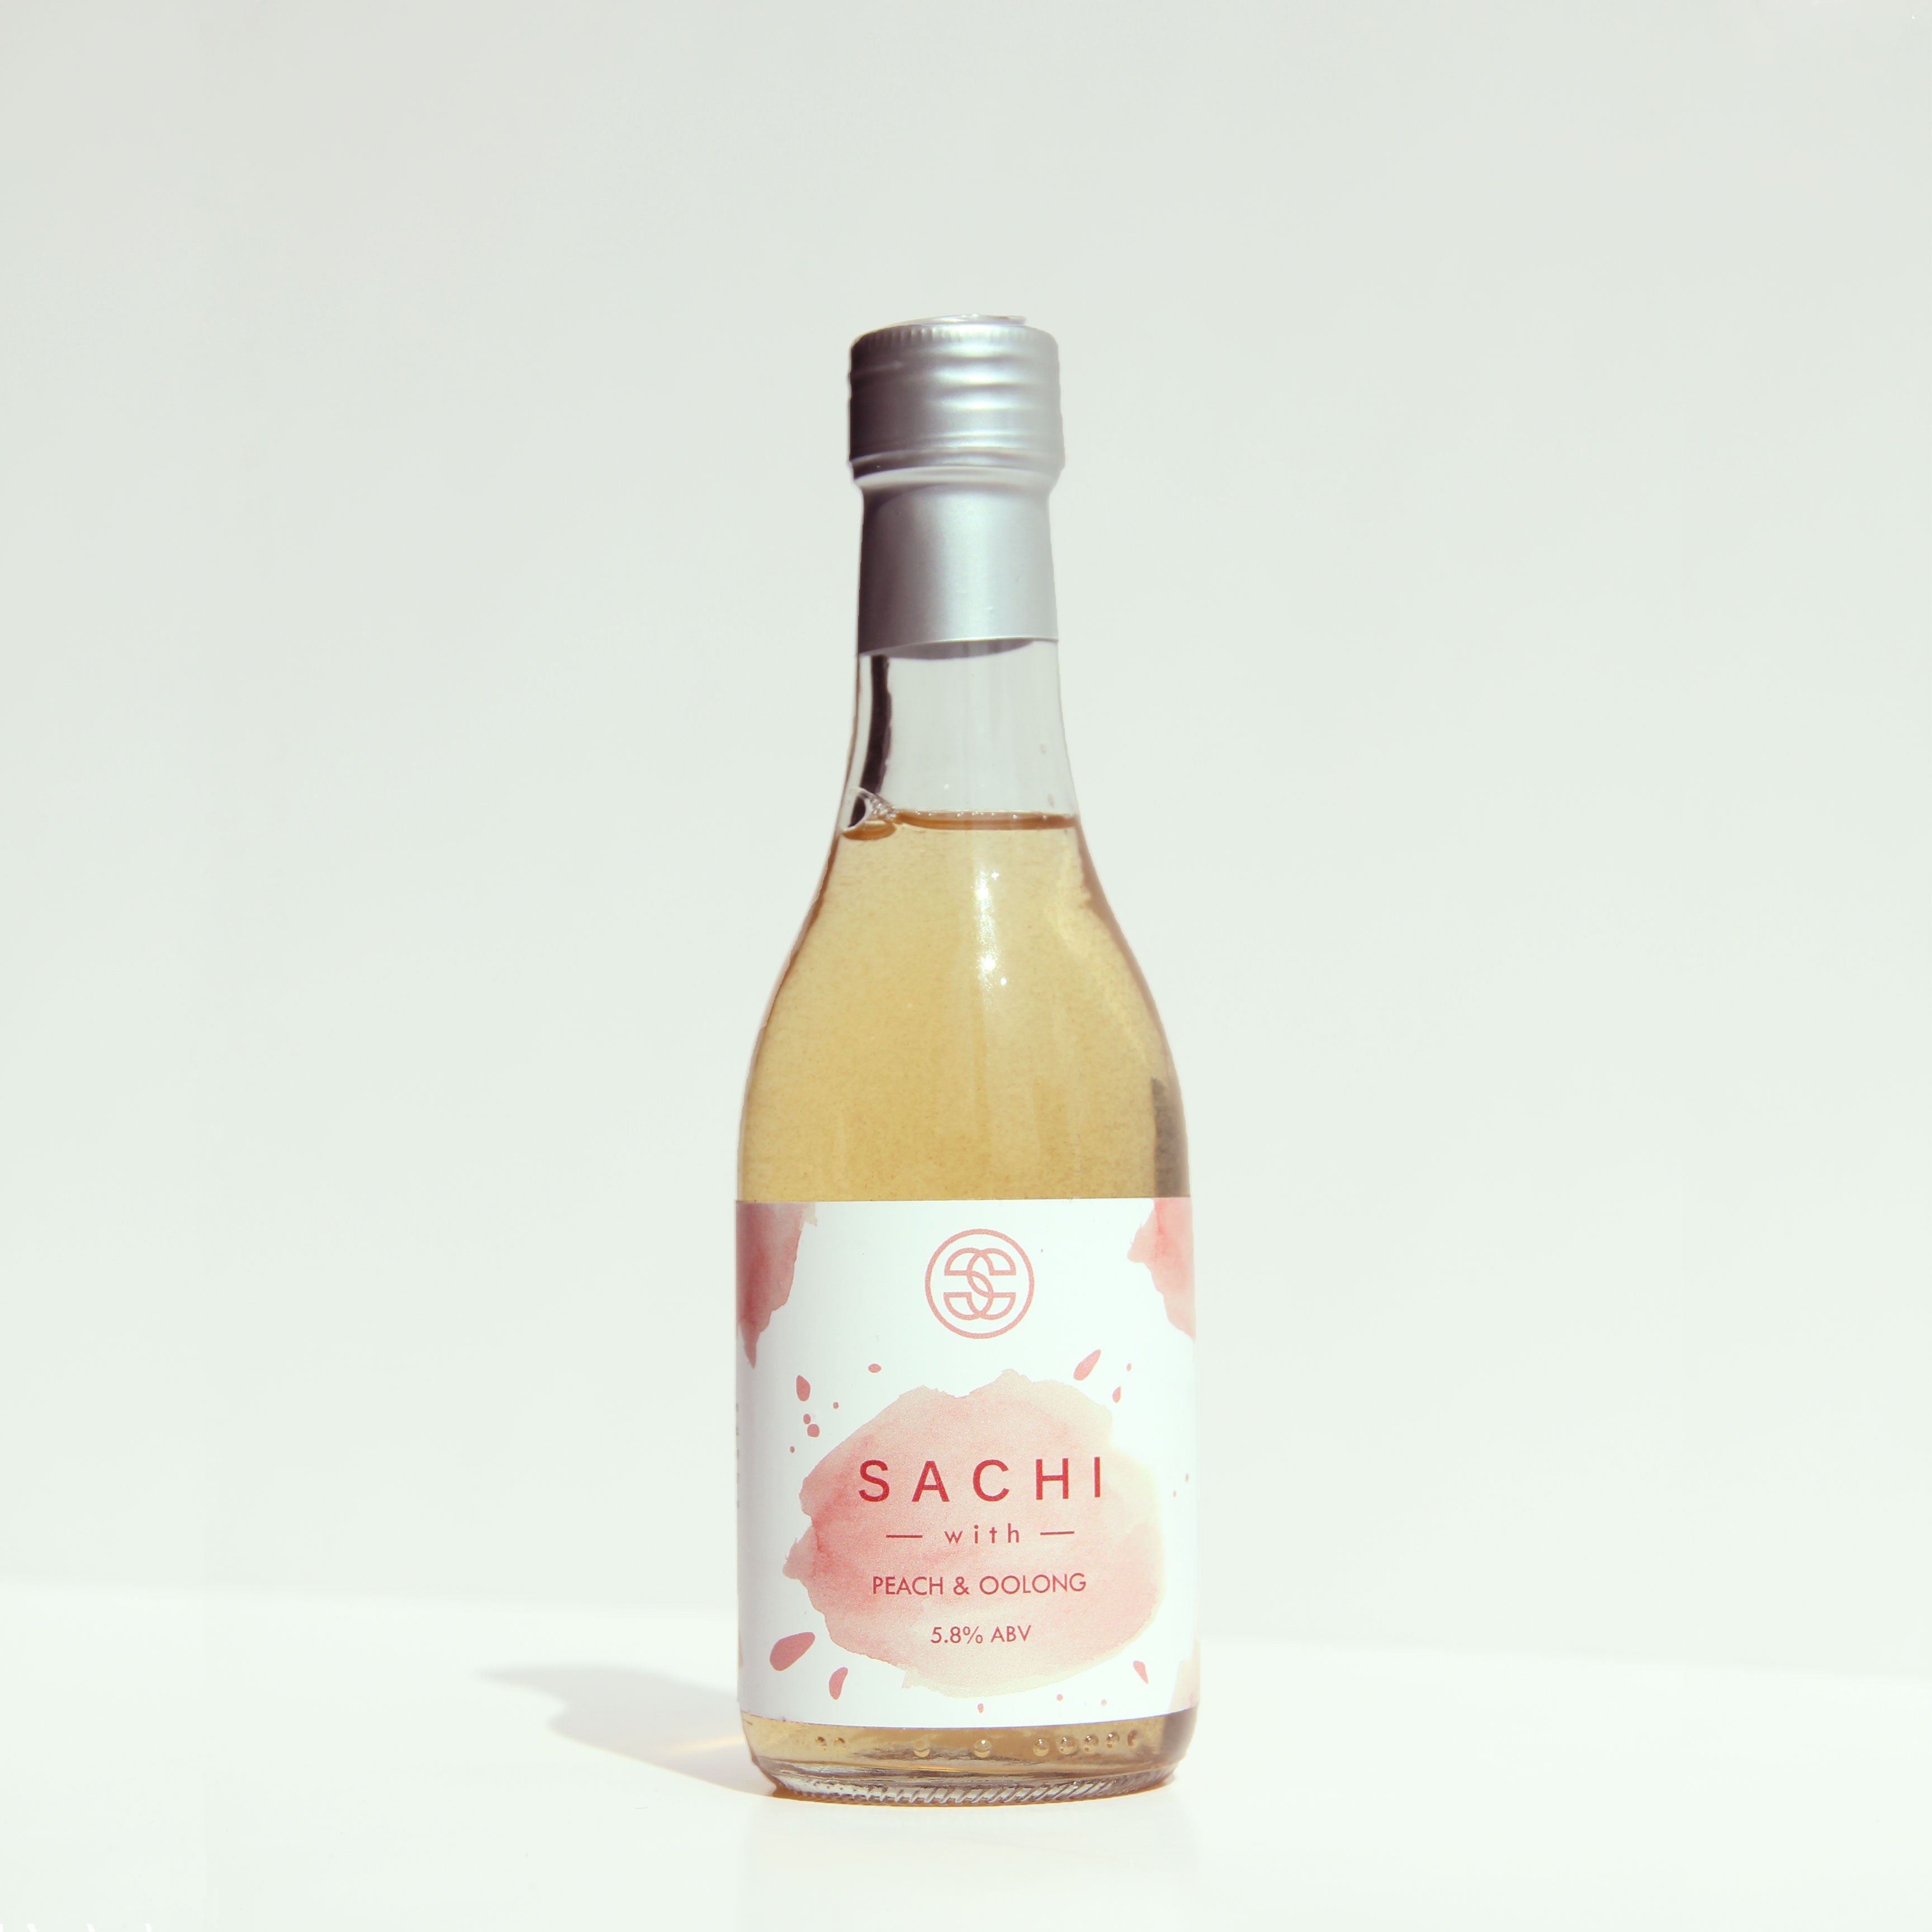 Peach & Oolong by Sinfootech Pte Ltd | Available at The Green Collective